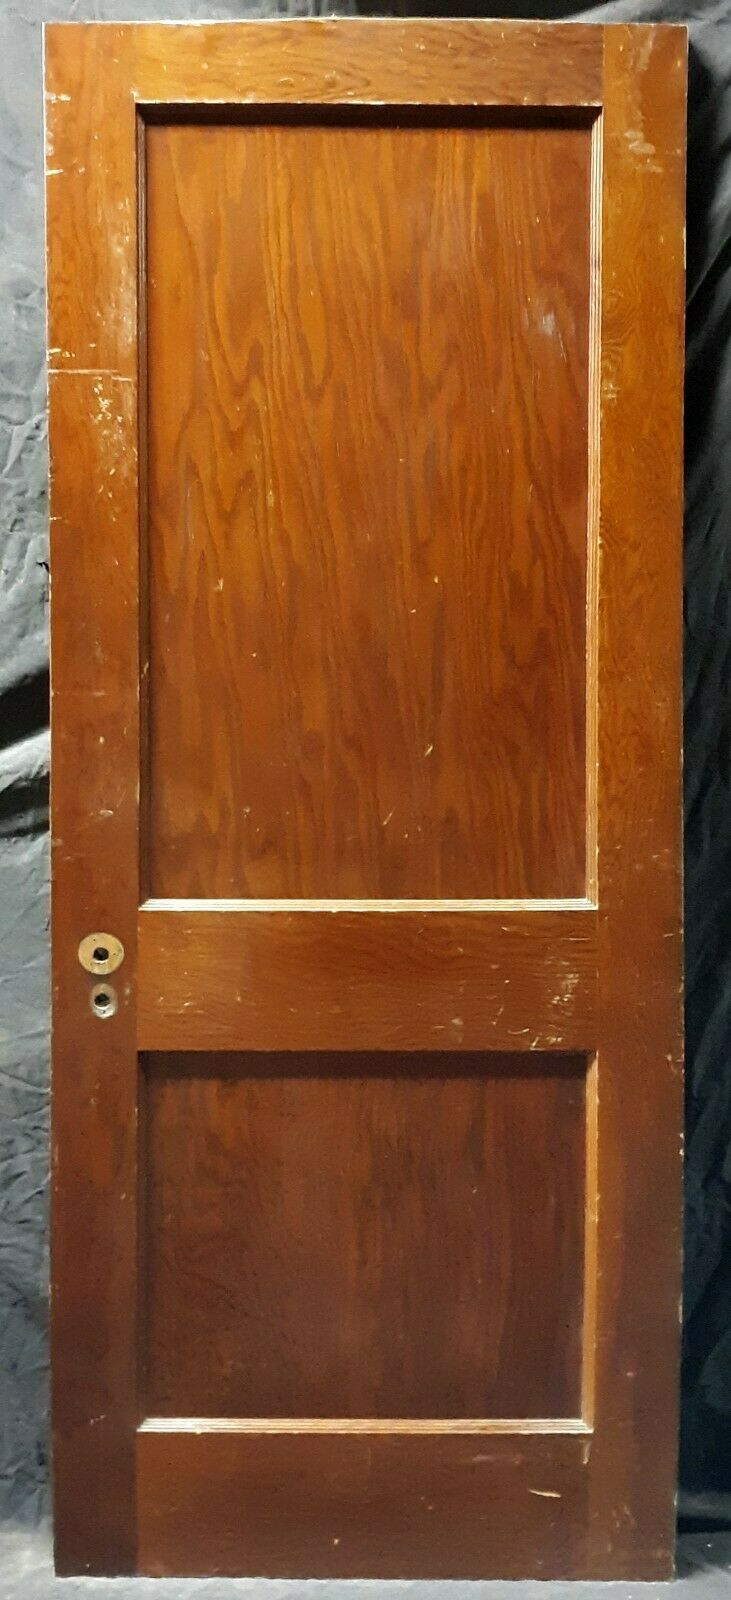 4 available 30"x77" Antique Vintage Old Reclaimed Salvaged Interior SOLID Wood Wooden Doors 2 Panels